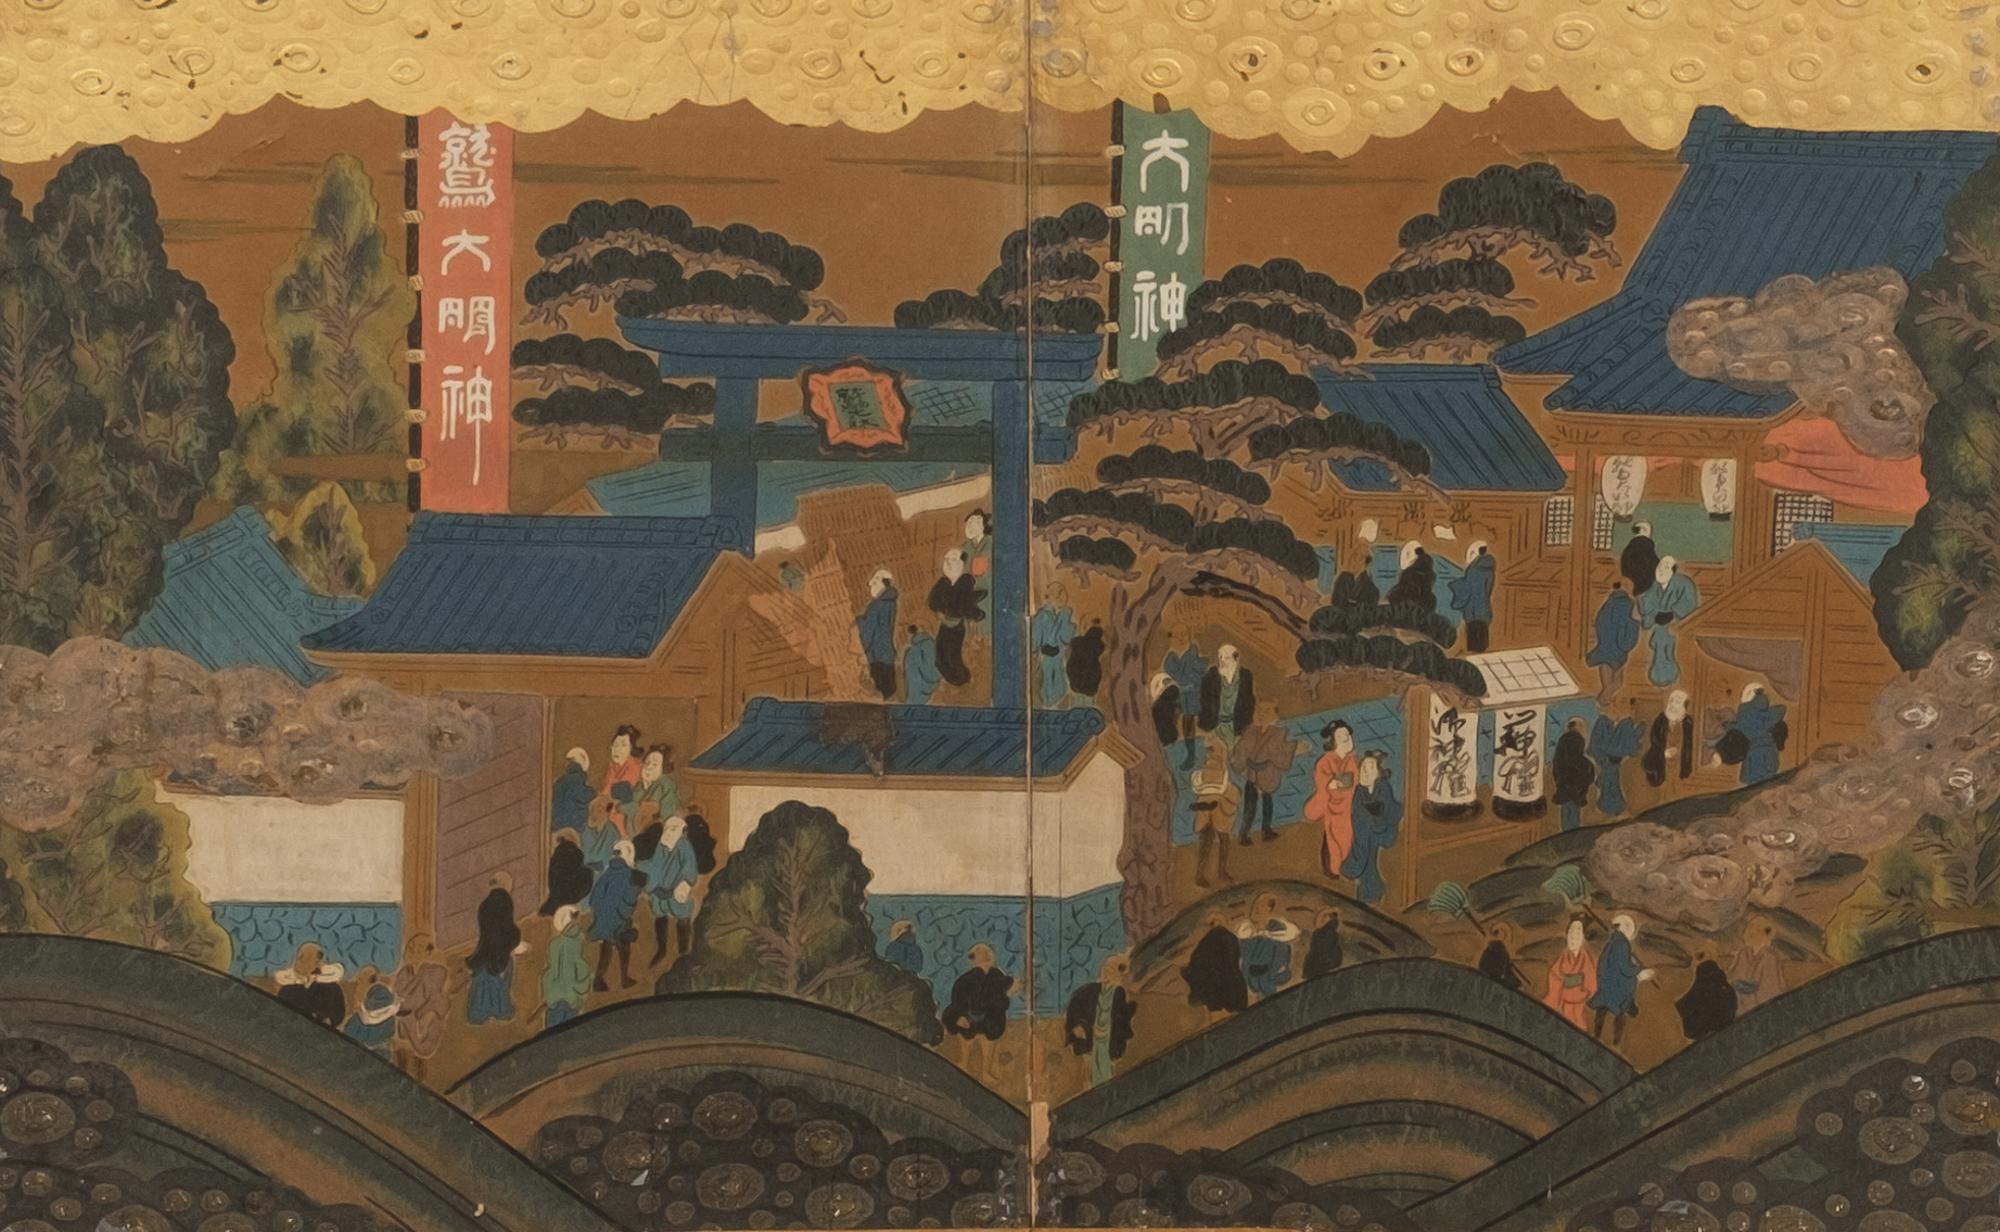 A nice, low, very decorative 6-panel byôbu (folding screen) features a continuous genre painting capturing various facets of daily life during the Edo period. It includes scenes such as boats leisurely sailing on a lake, lively activities within a